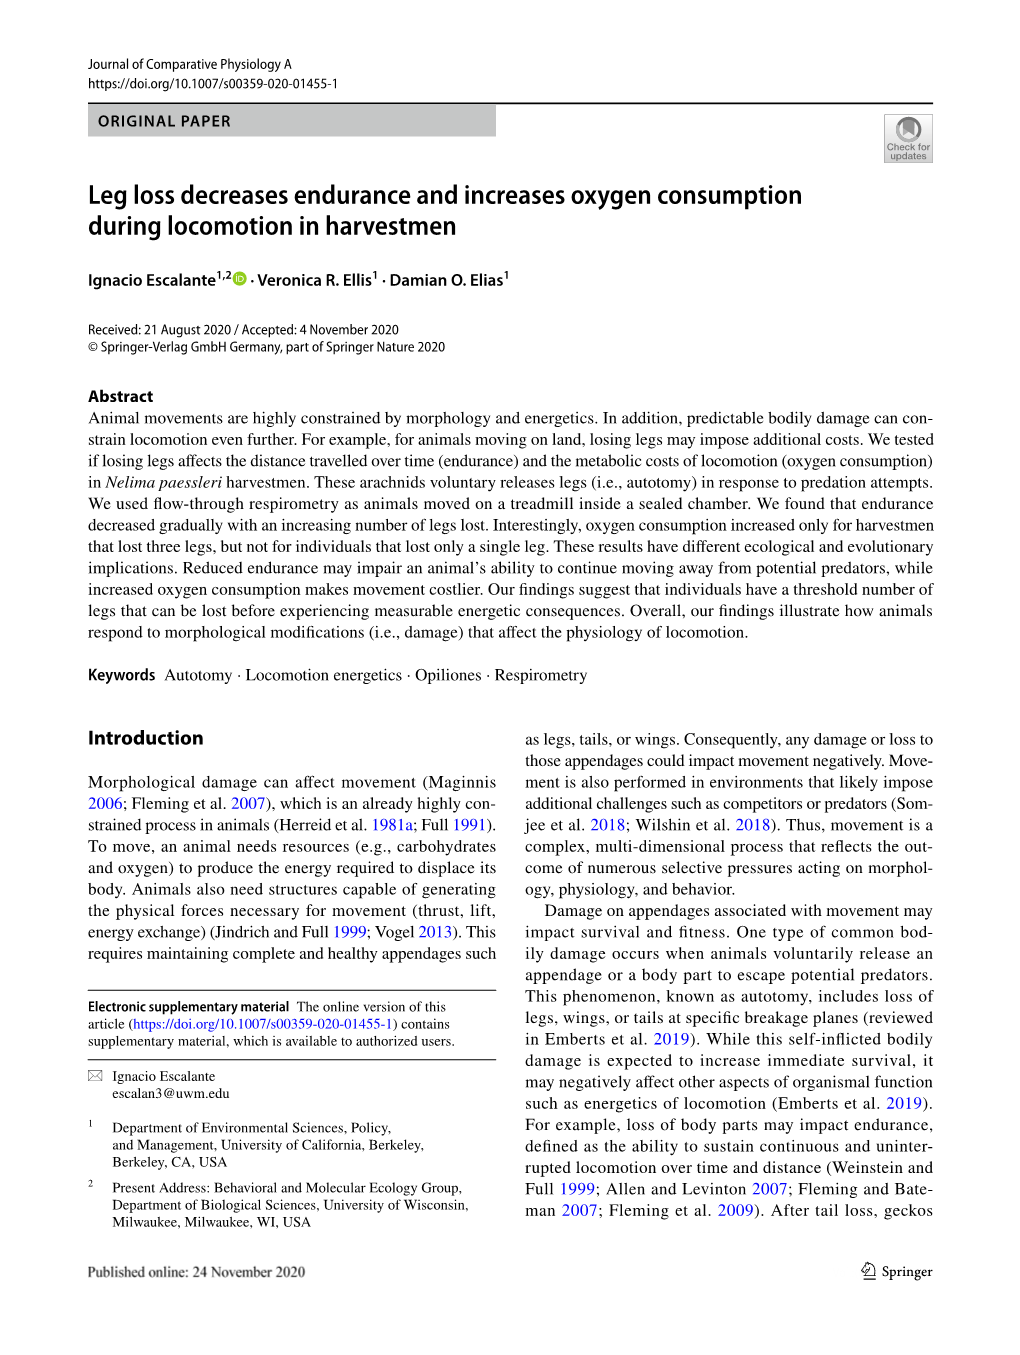 Leg Loss Decreases Endurance and Increases Oxygen Consumption During Locomotion in Harvestmen